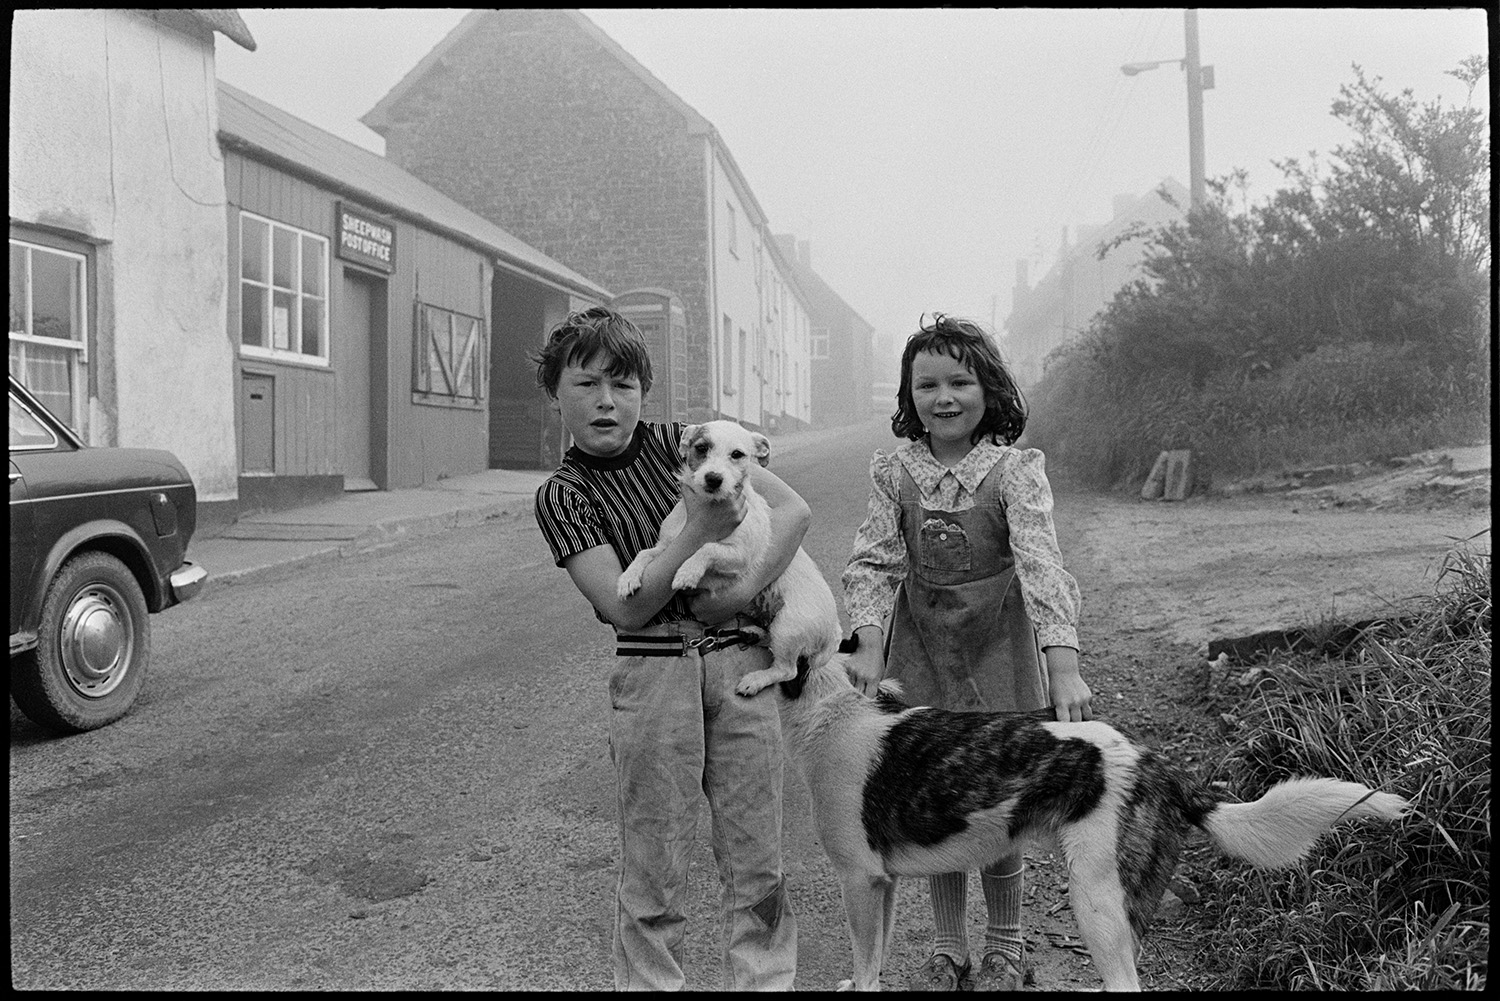 Street scenes with children, car and telephone kiosk. 
[A boy and girl, and two dogs, playing in the street outside Sheepwash Post Office, in Sheepwash. A telephone box and car can be seen in the background.]